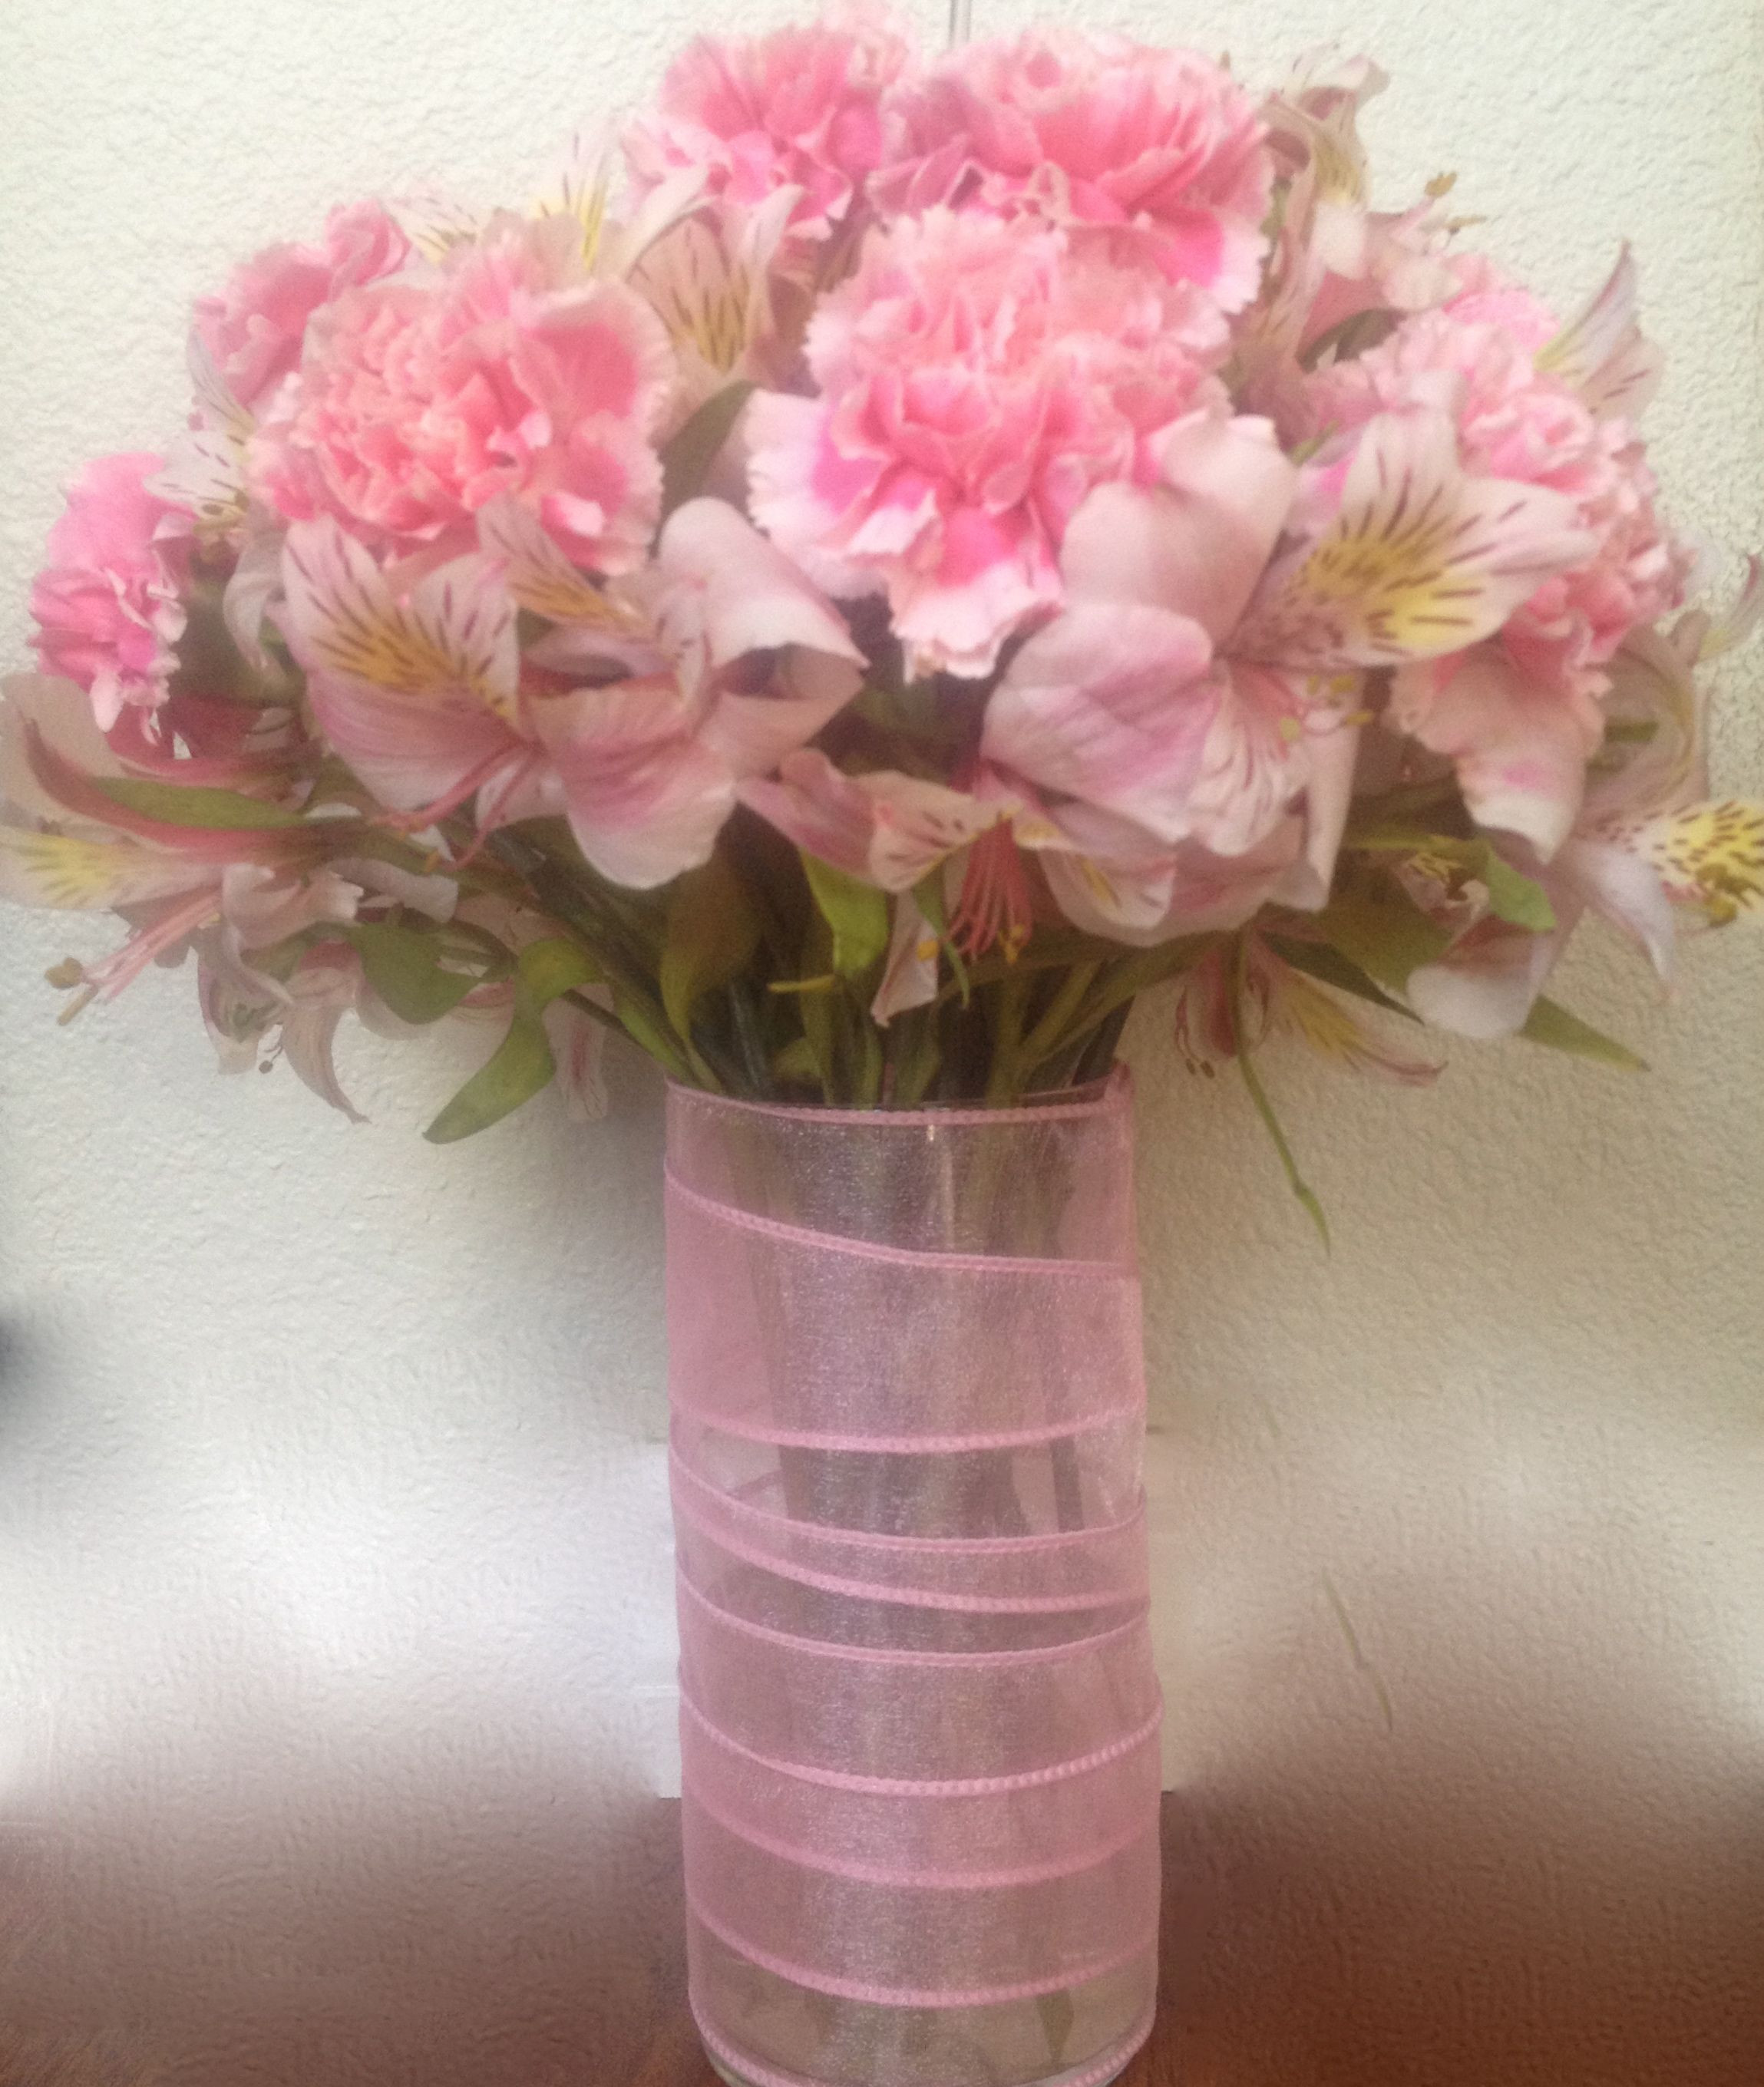 15 Stylish Small Square Flower Vase 2024 free download small square flower vase of its a girl pink carnations alstroemeria in a glass vase wrapped inside pink carnations alstroemeria in a glass vase wrapped in pink ribbon